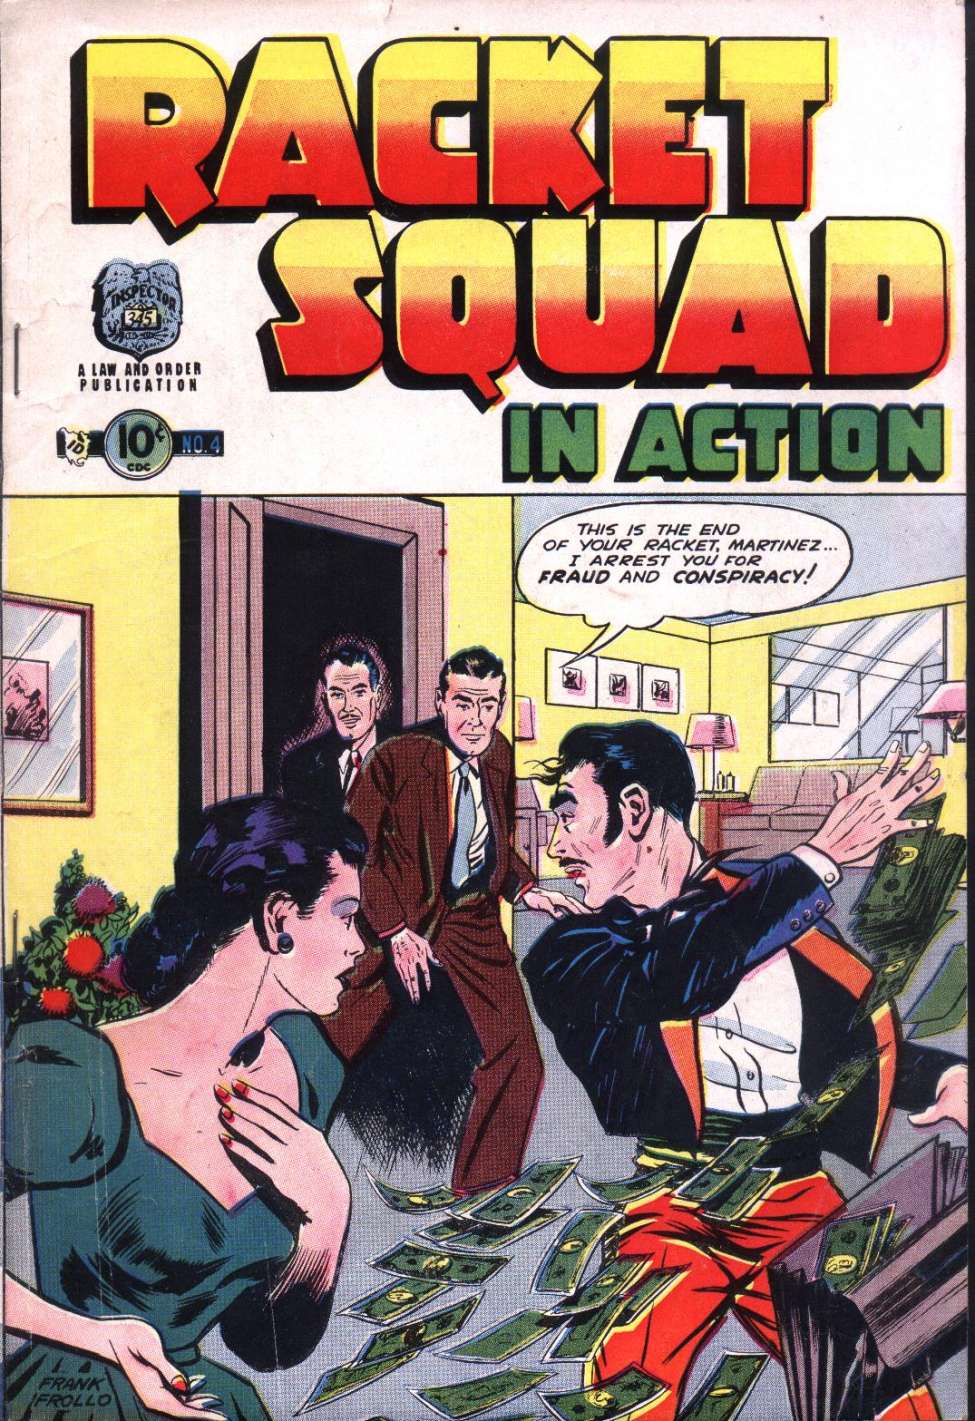 Book Cover For Racket Squad in Action 4